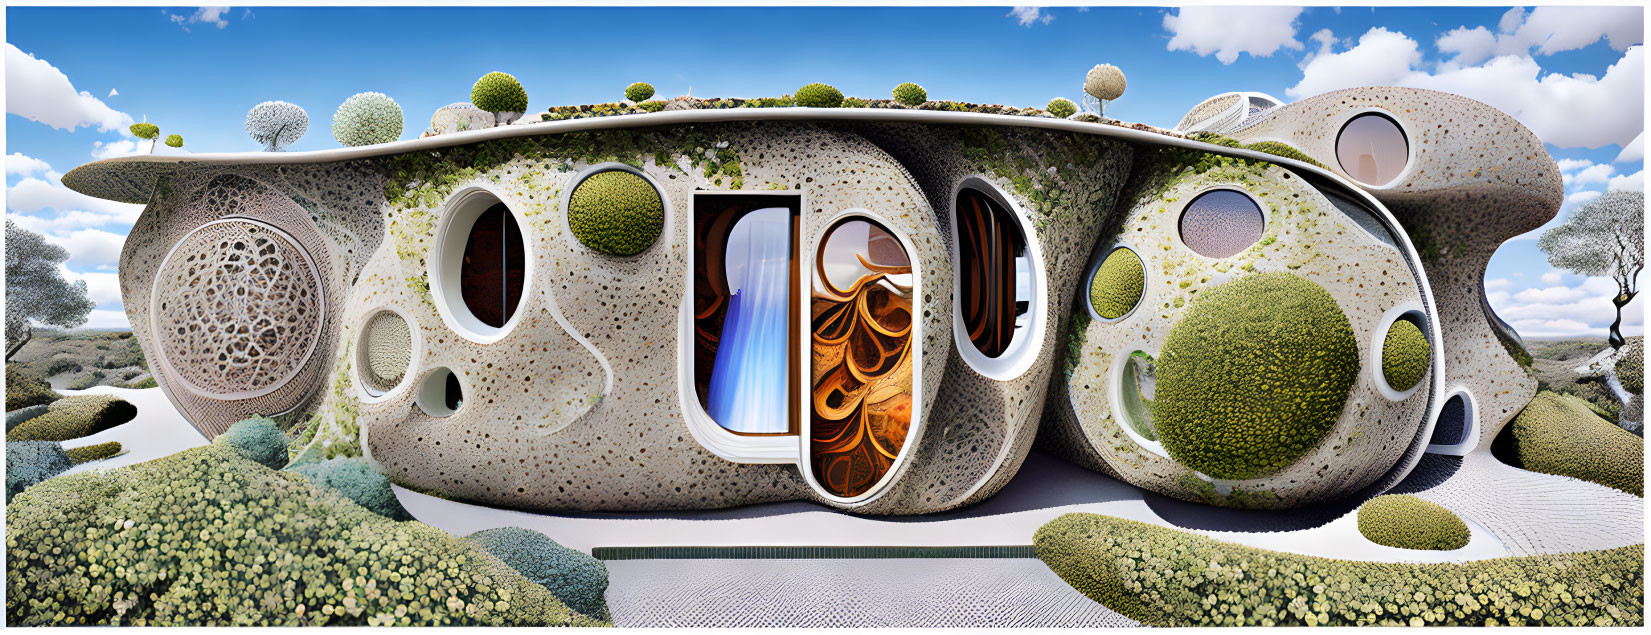 Organic-shaped building with patterned openings in surreal landscape